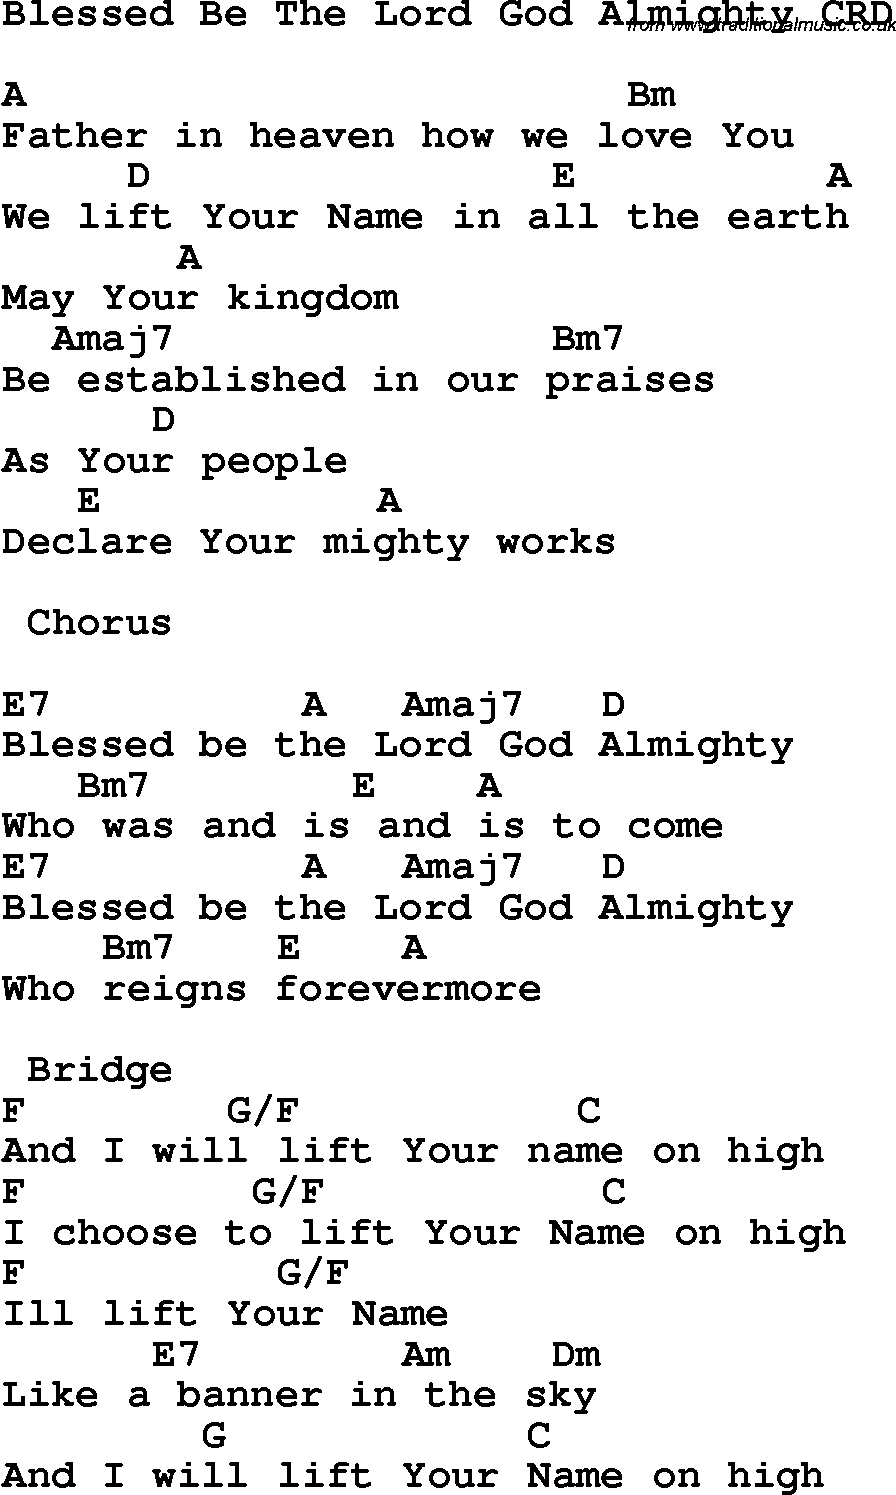 Lord I Lift Your Name On High Chords Christian Childrens Song Blessed Be The Lord God Almighty Lyrics